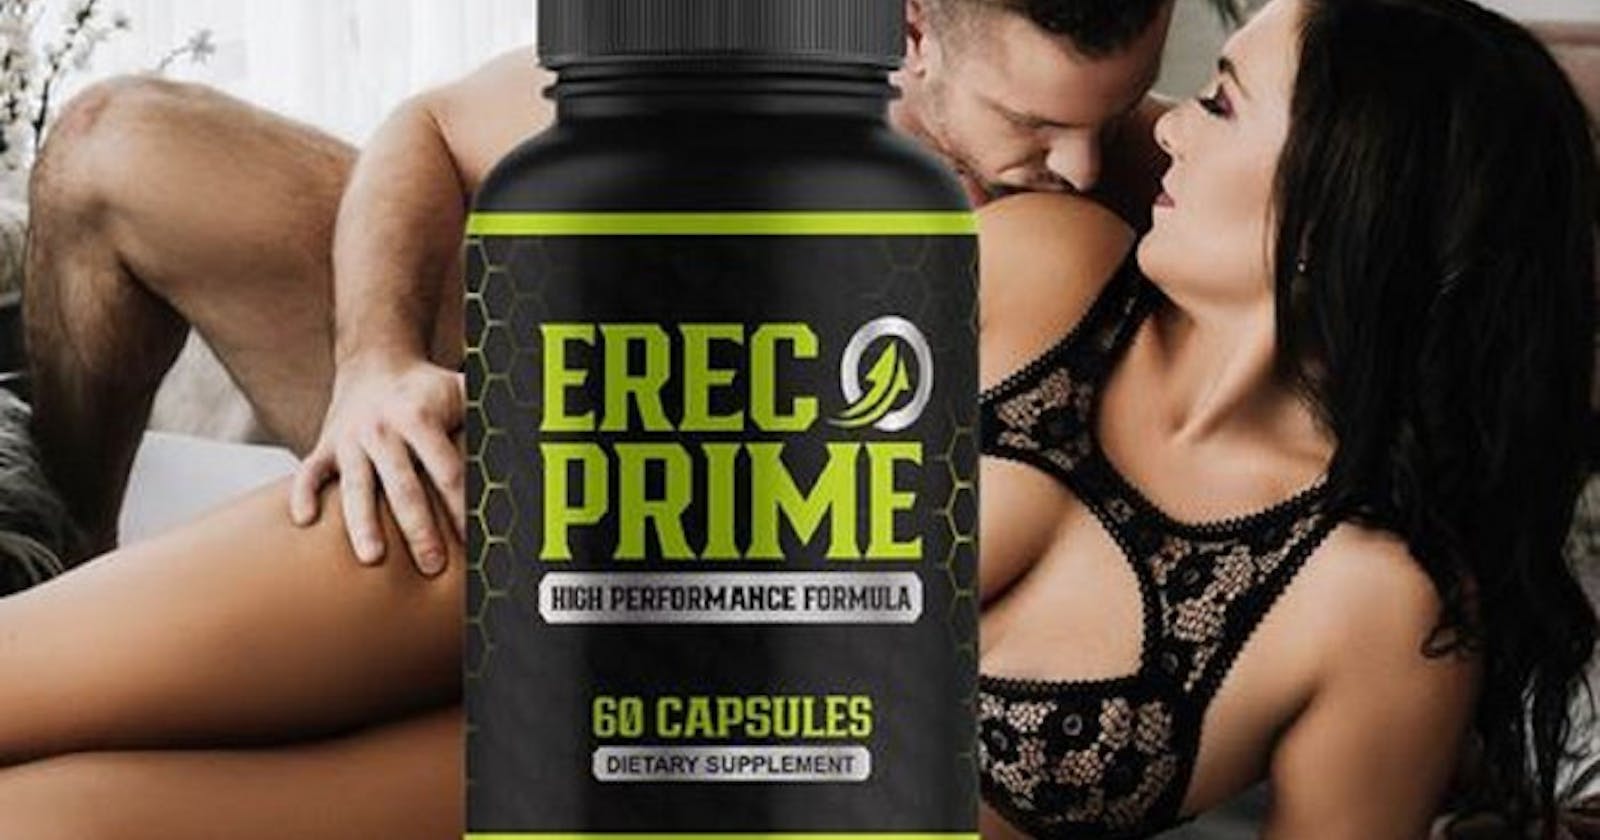 ErecPrime Reviews: Does It Work? What They Won’t Tell You Before Buy!